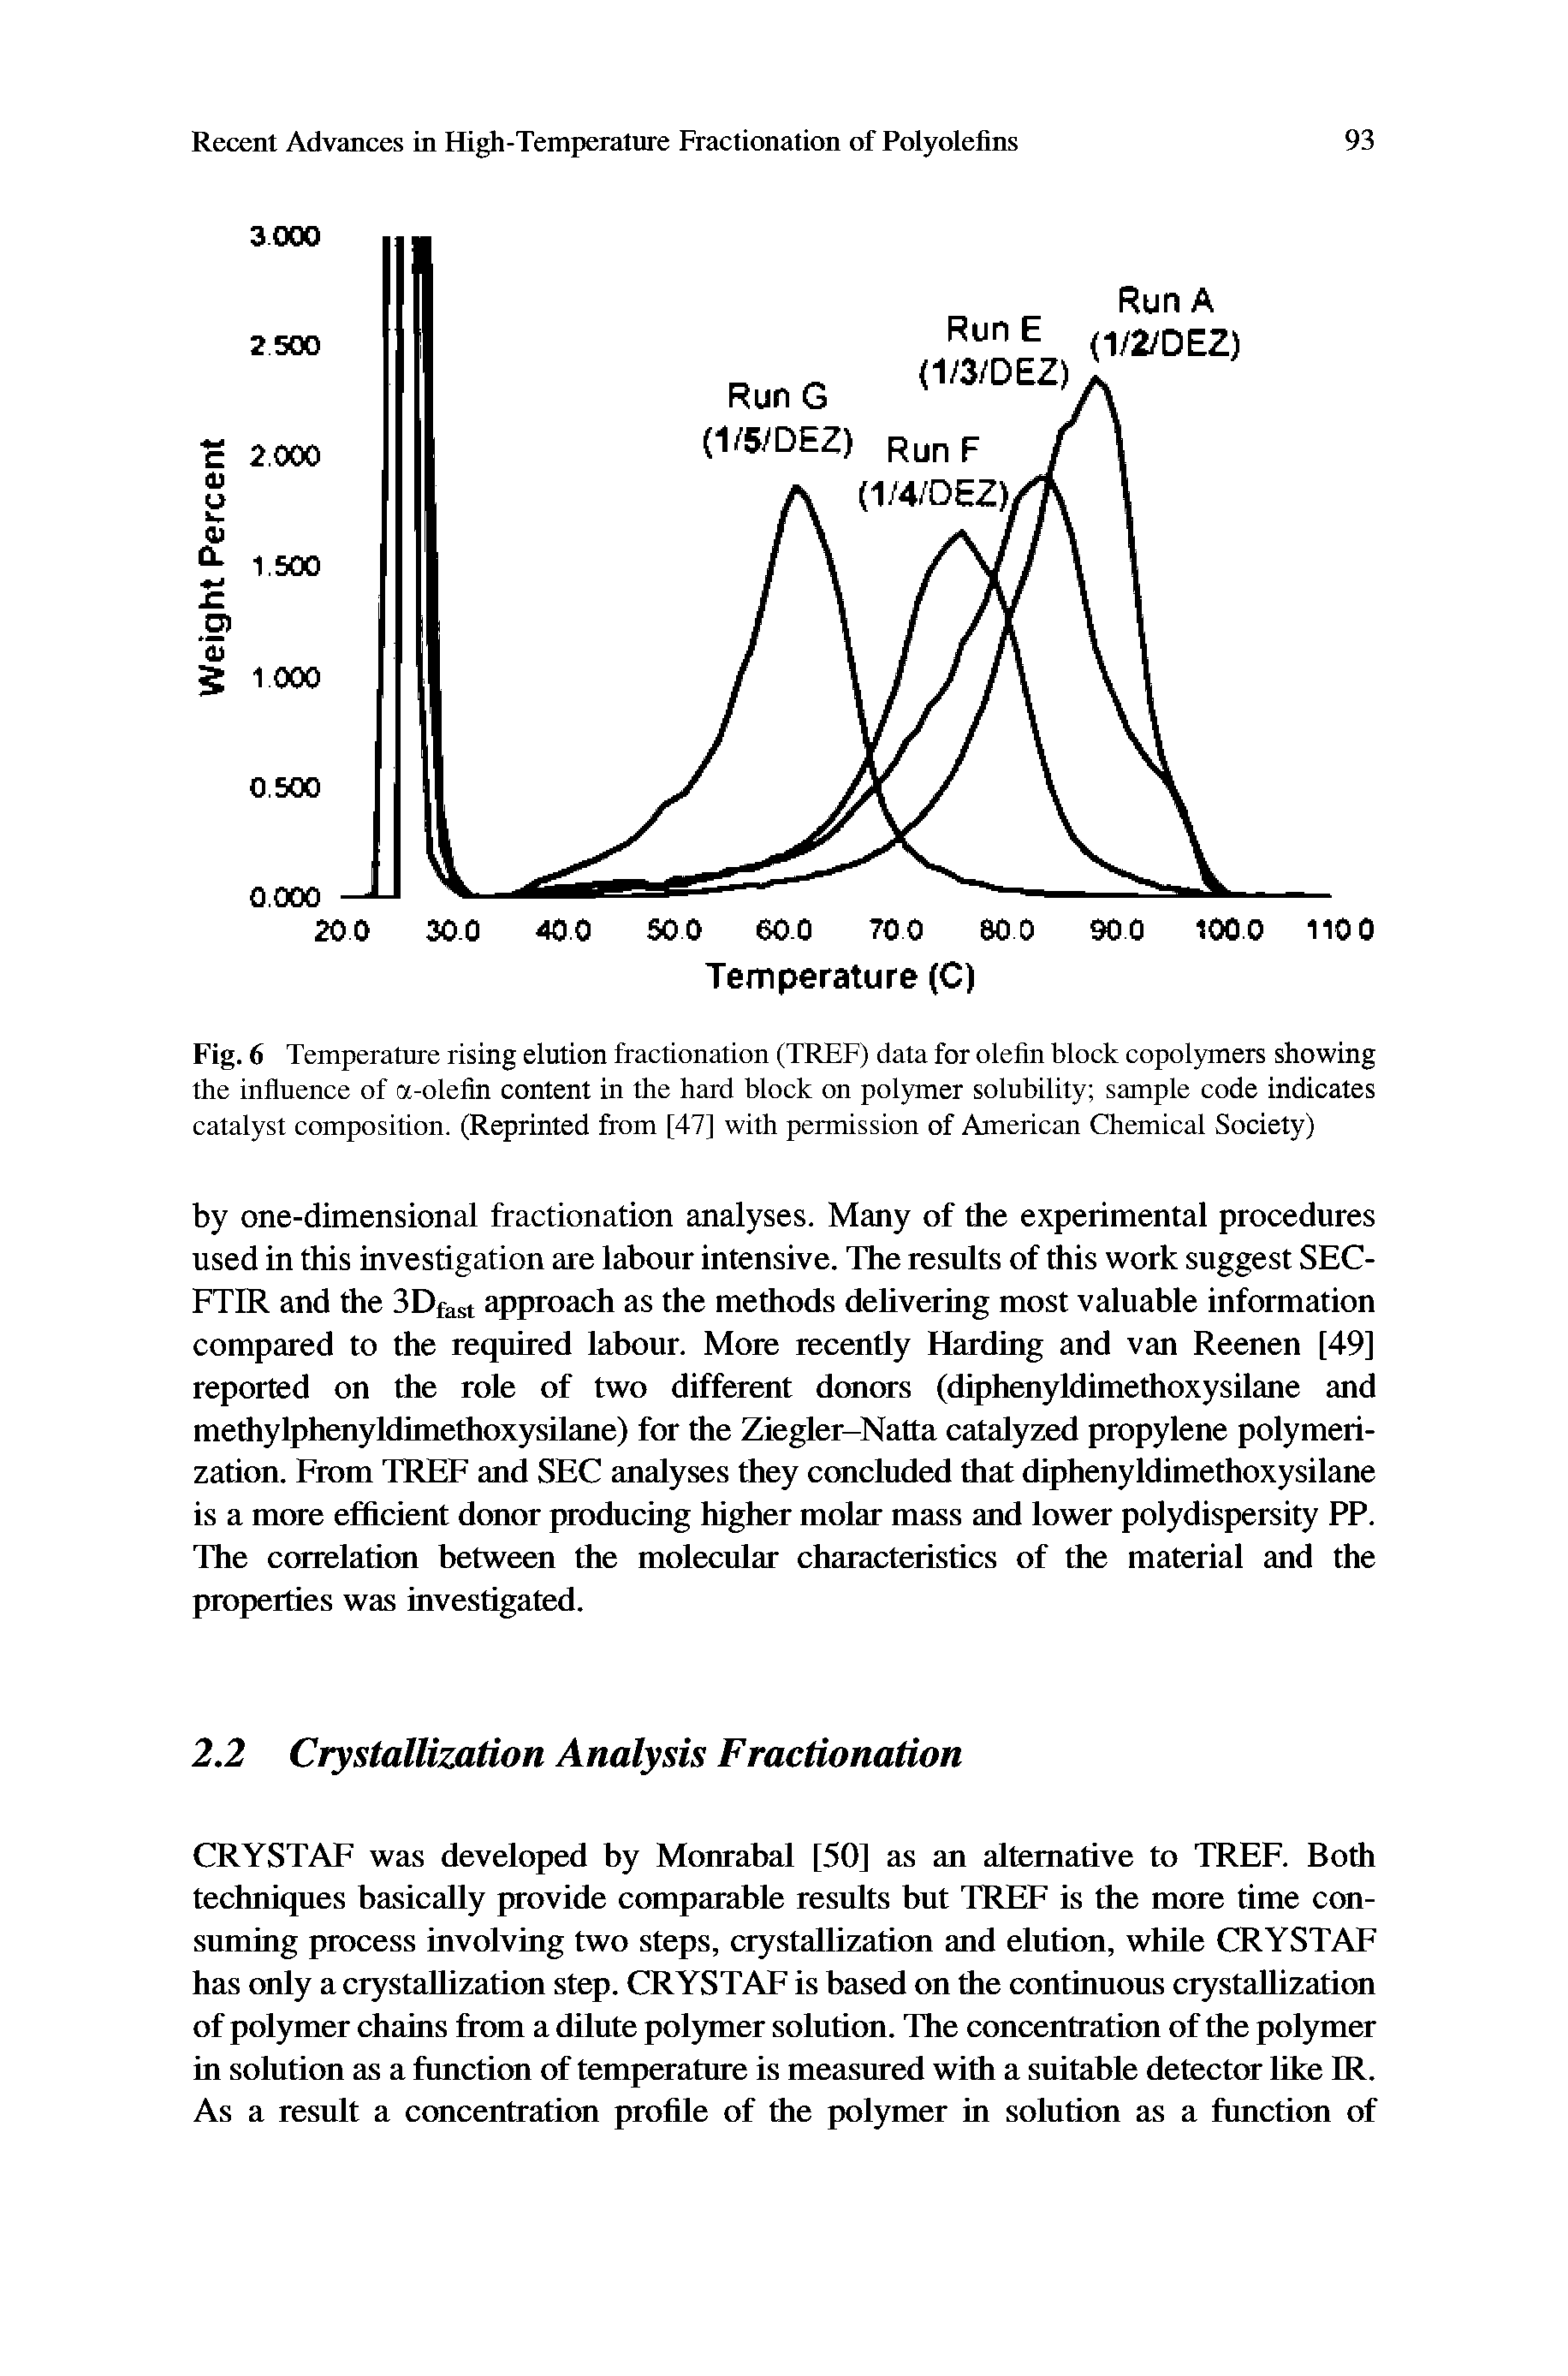 Fig. 6 Temperature rising elution fractionation (TREF) data for olefin block copolymers showing the influence of a-olefin content in the hard block on polymer solubility sample code indicates catalyst composition. (Reprinted from [47] with permission of American Chemical Society)...